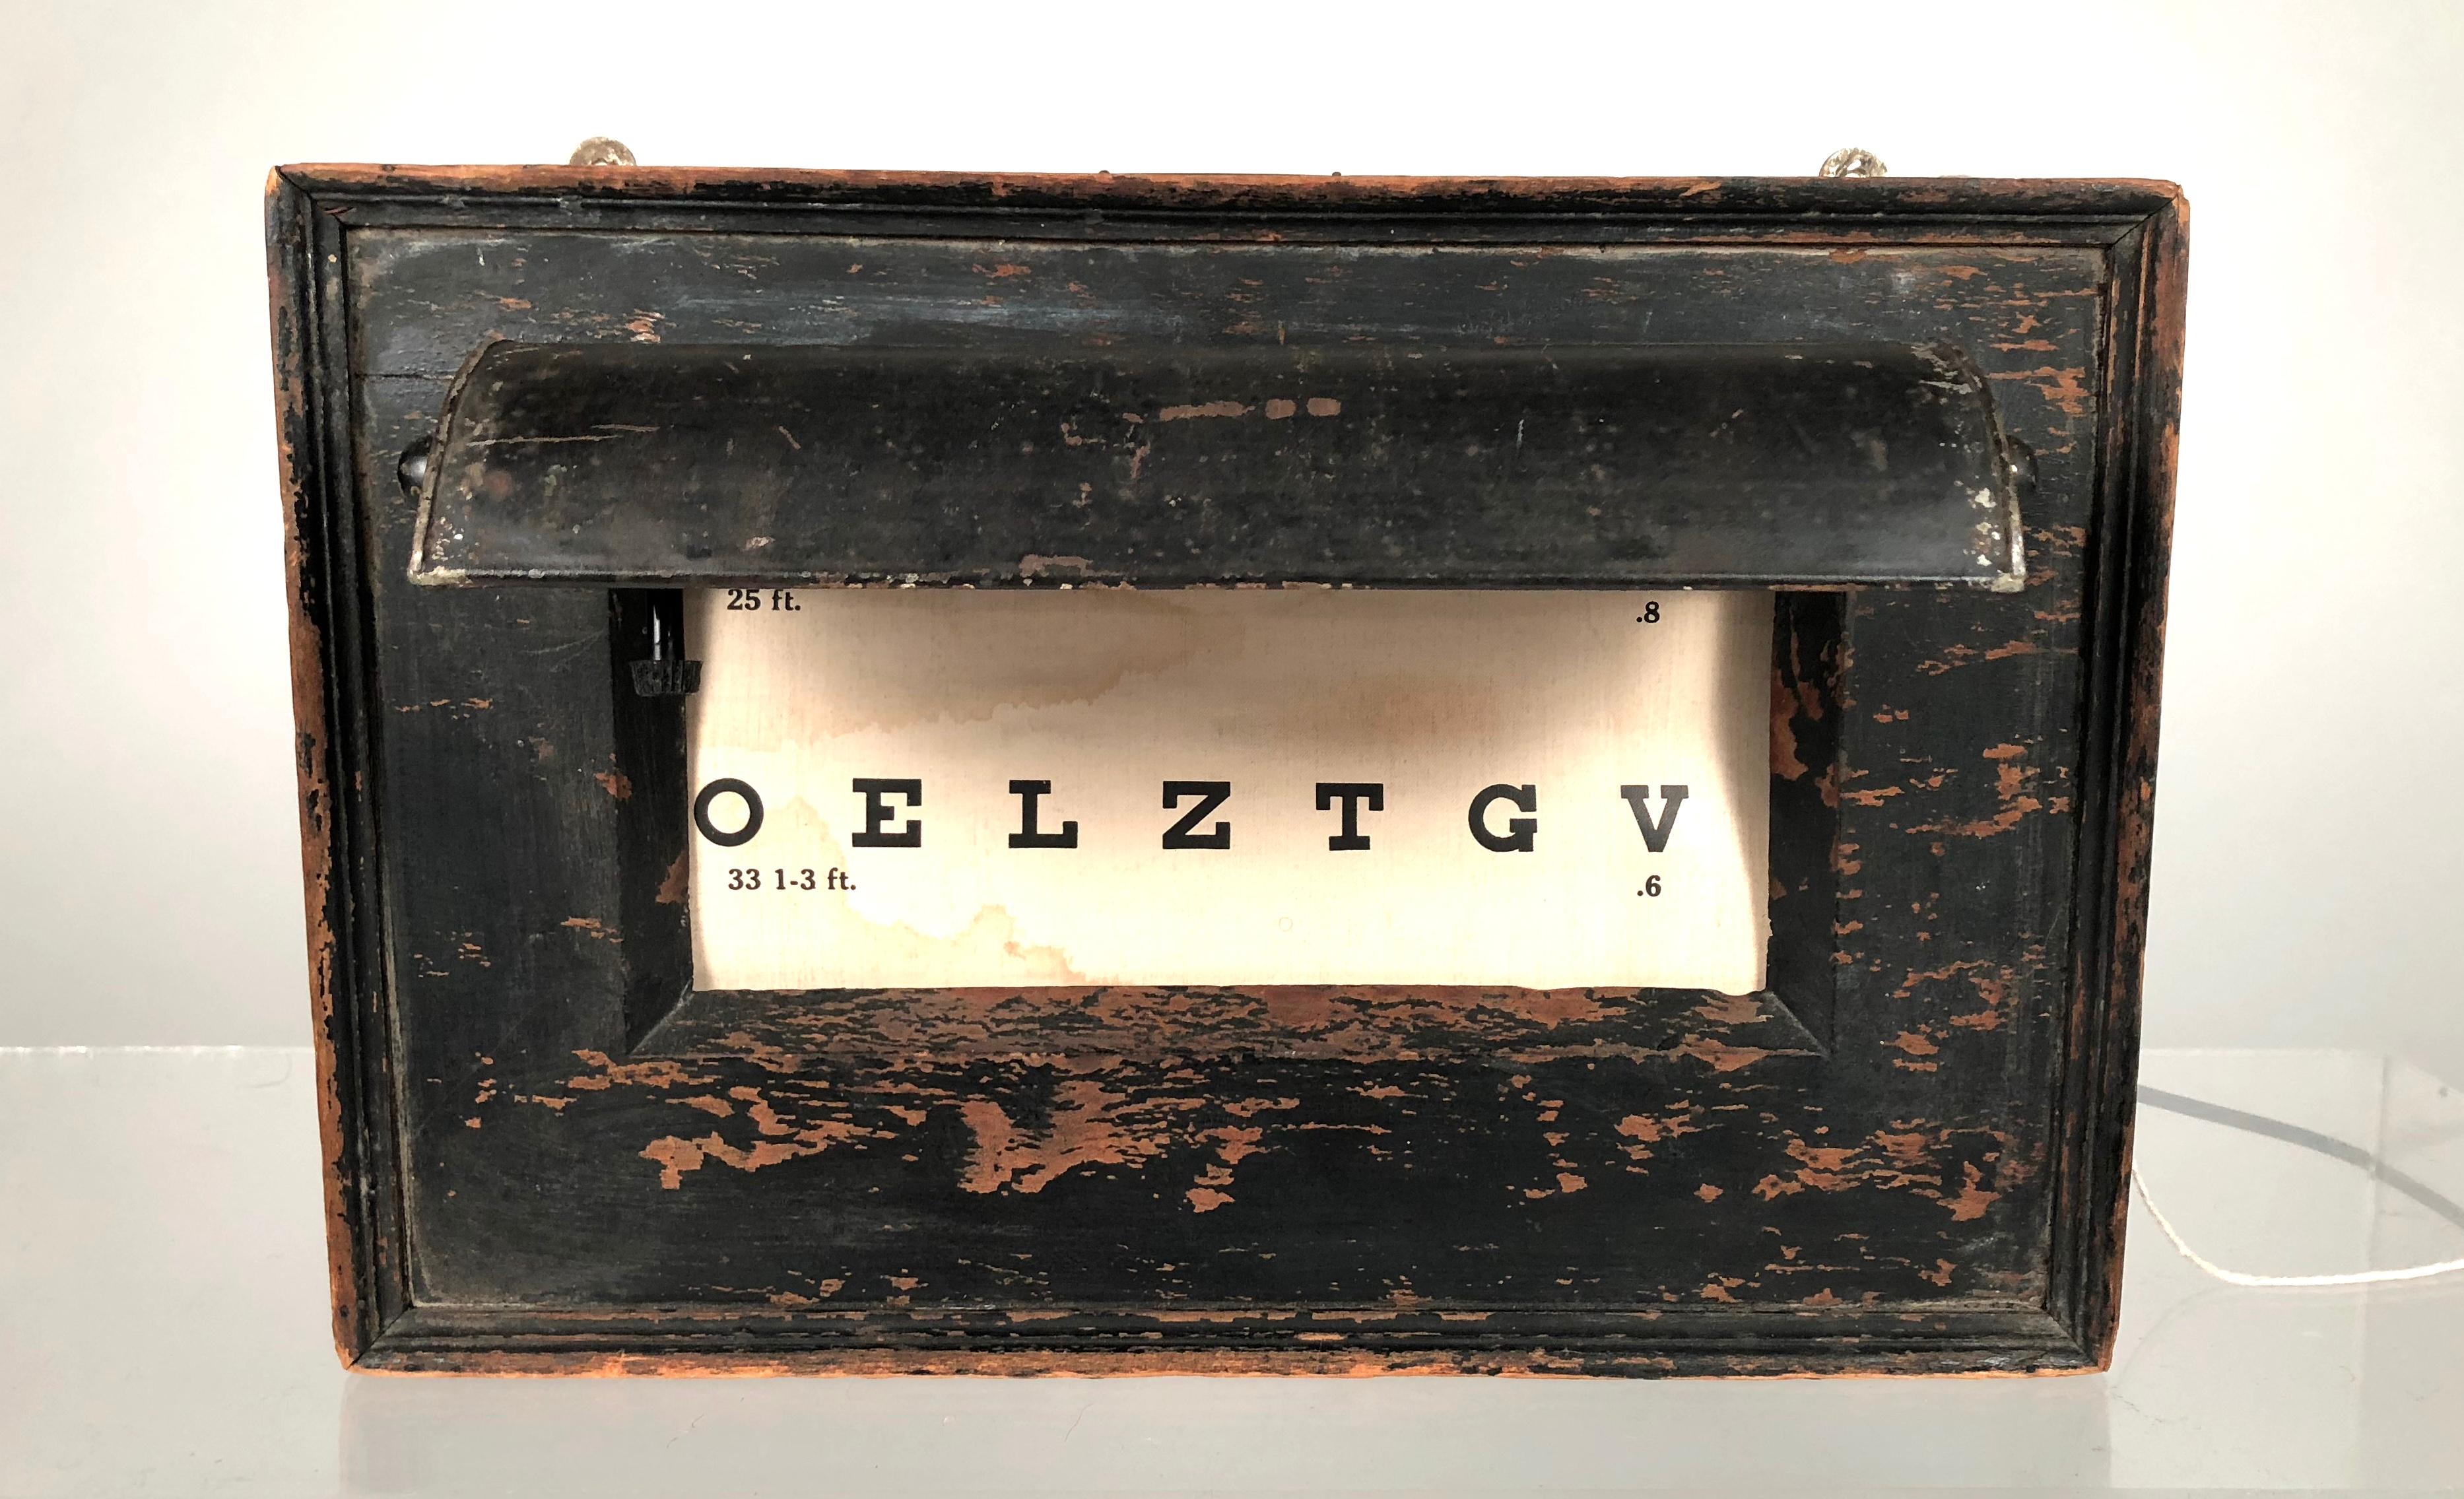 A rare, early illuminated optician's eye test chart, made by the Globe Optical Company, Boston, intended to be mounted on a wall. The rectangular black painted wooden case has decorative molding along the perimeter, a metal visor with light bulb at